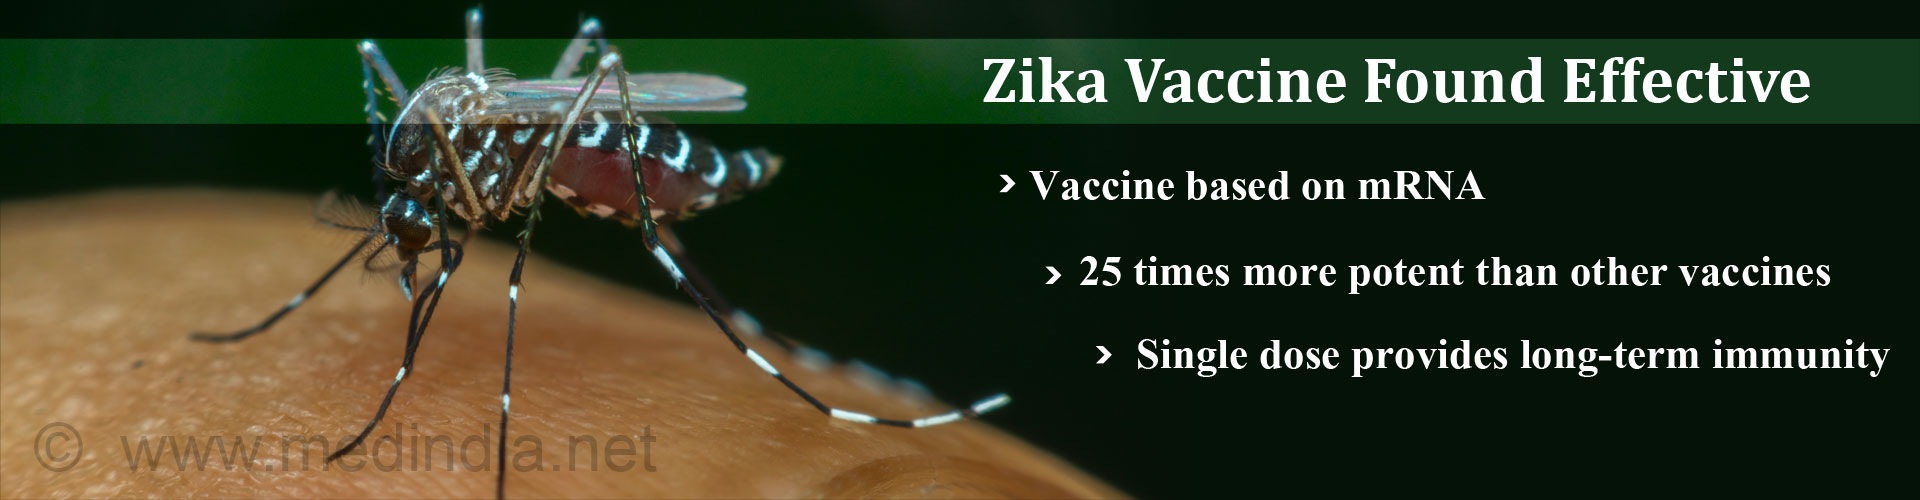 Zika Vaccine Found Effective
- Vaccine based on mRNA
- 25 times more potent then other vaccines
- Single dose provides long-term immunity